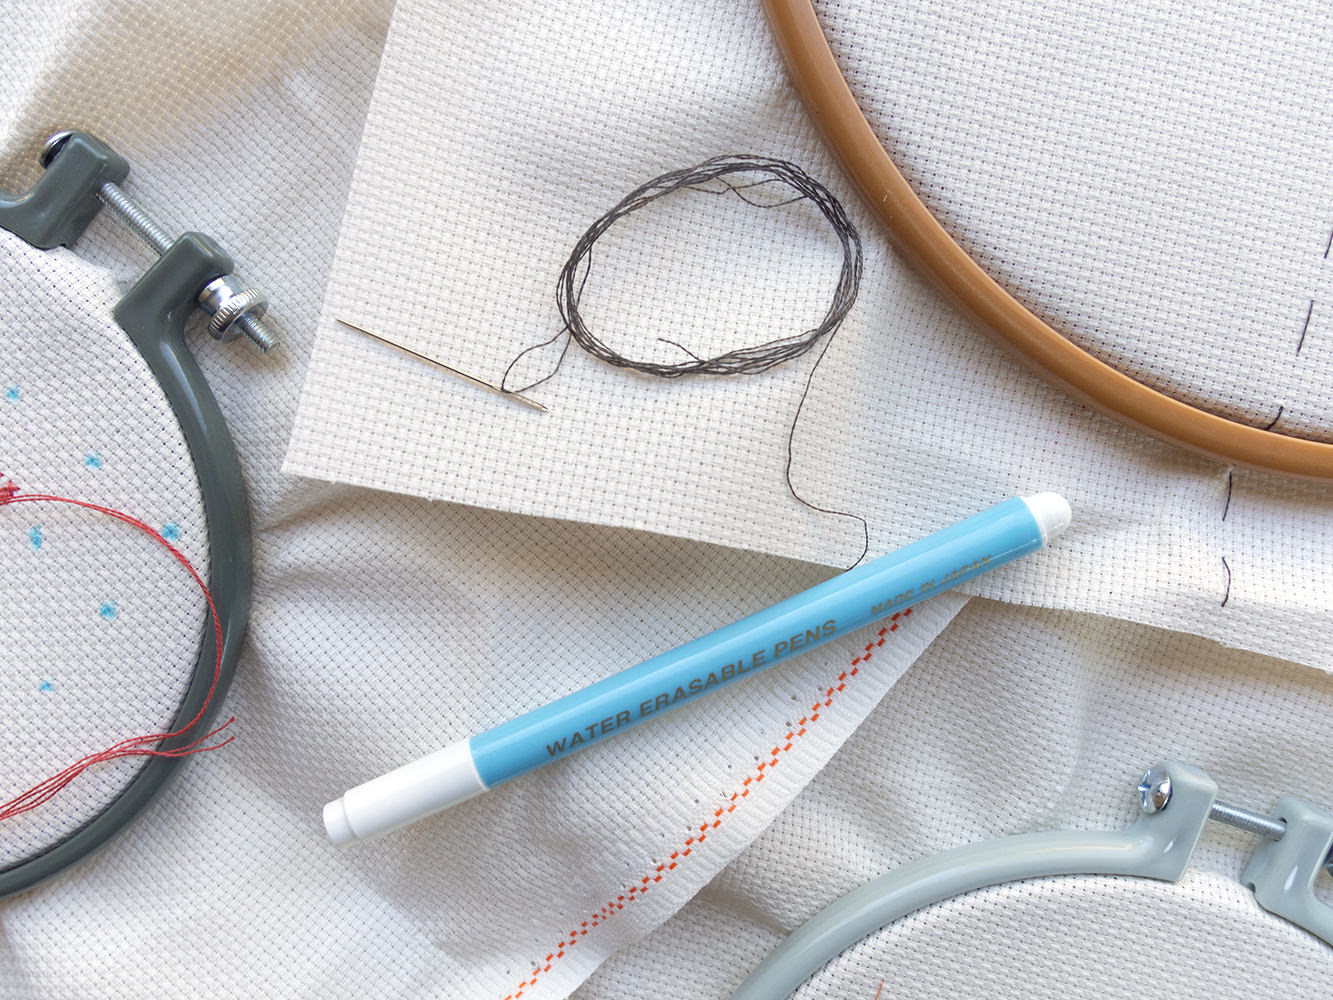 embroidery hoops, aida fabric and a water soluble marker. One of the hoops has fabric marked with a grid of dots in it.